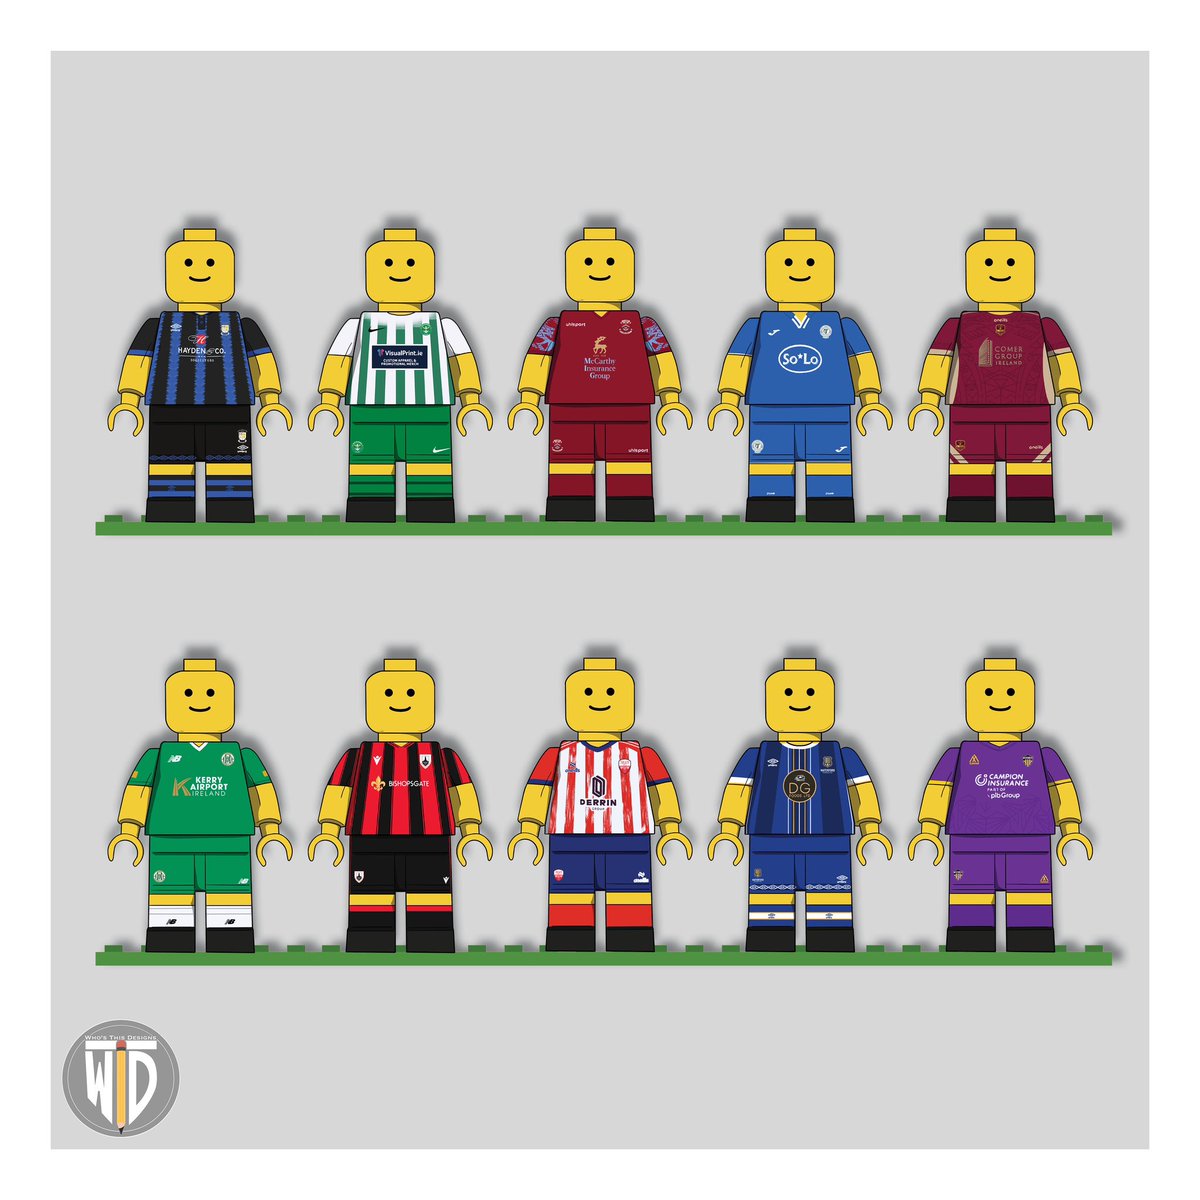 Following on from the Premier Division teams, here is all @LeagueofIreland First Division teams kits on Lego! #loi #leagueofireland #lego #legominifigures